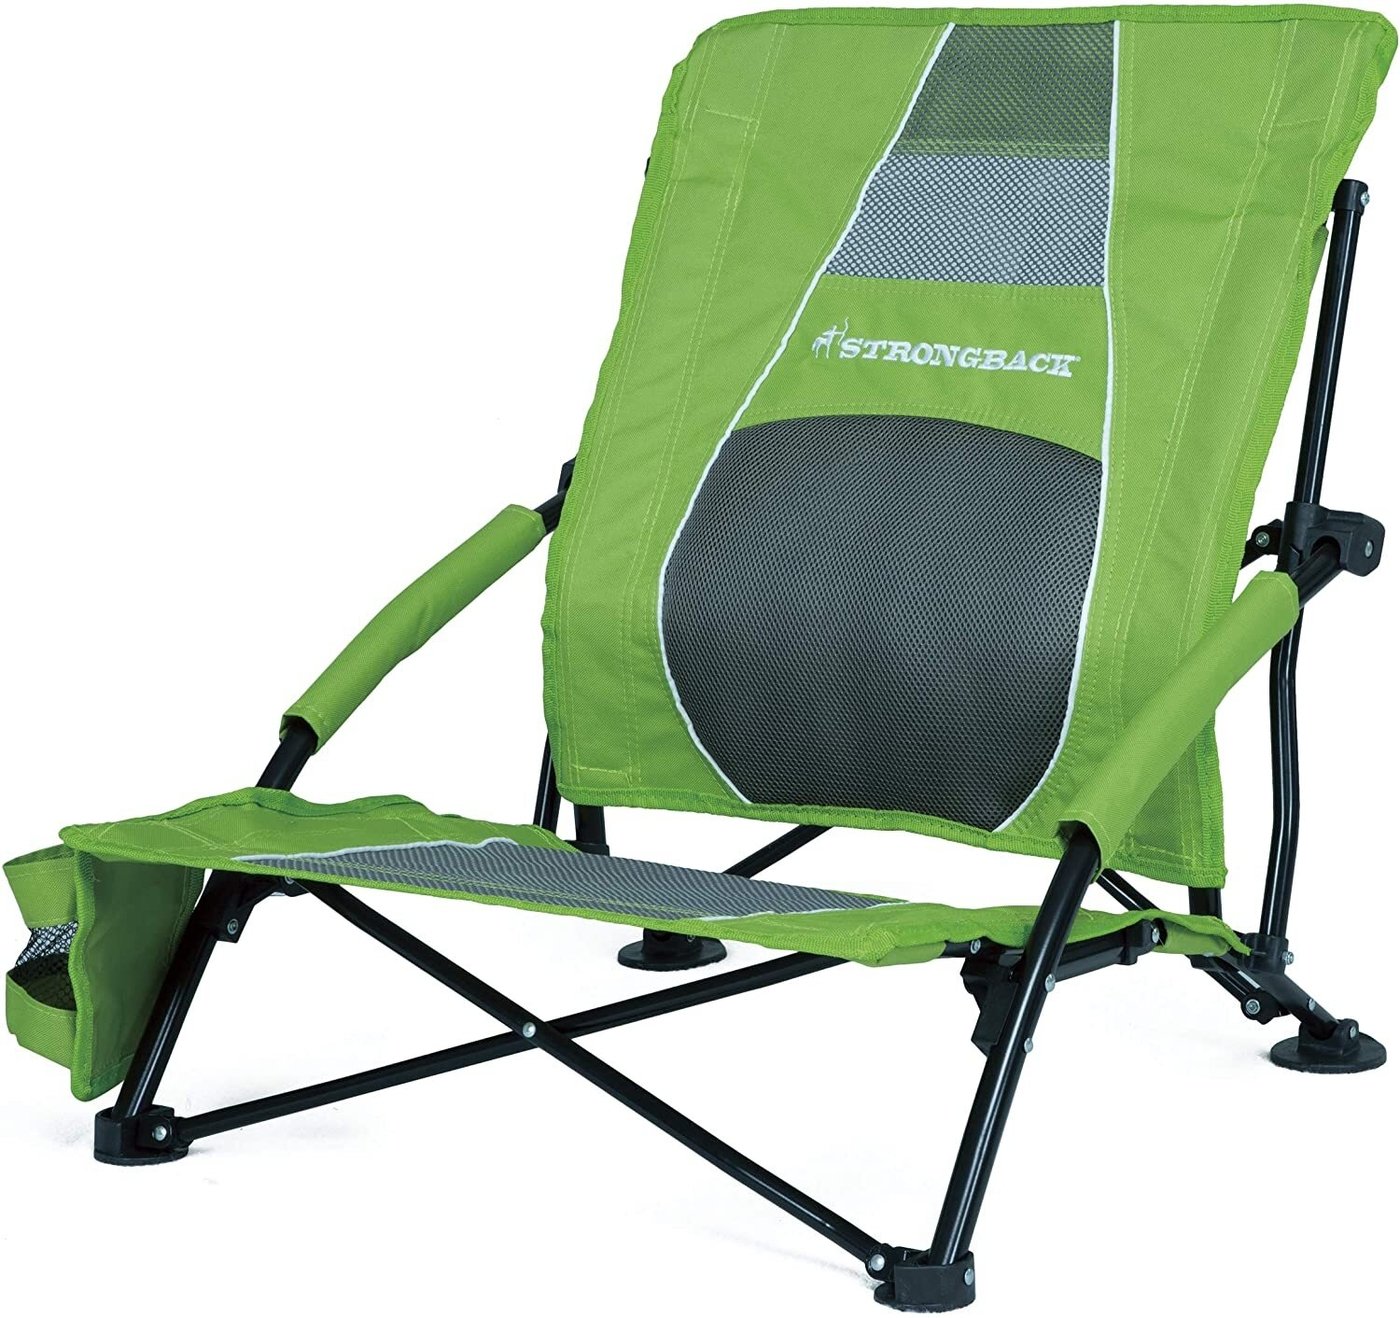 Beach Chair Features that Allow You to Relax In Style - Foter